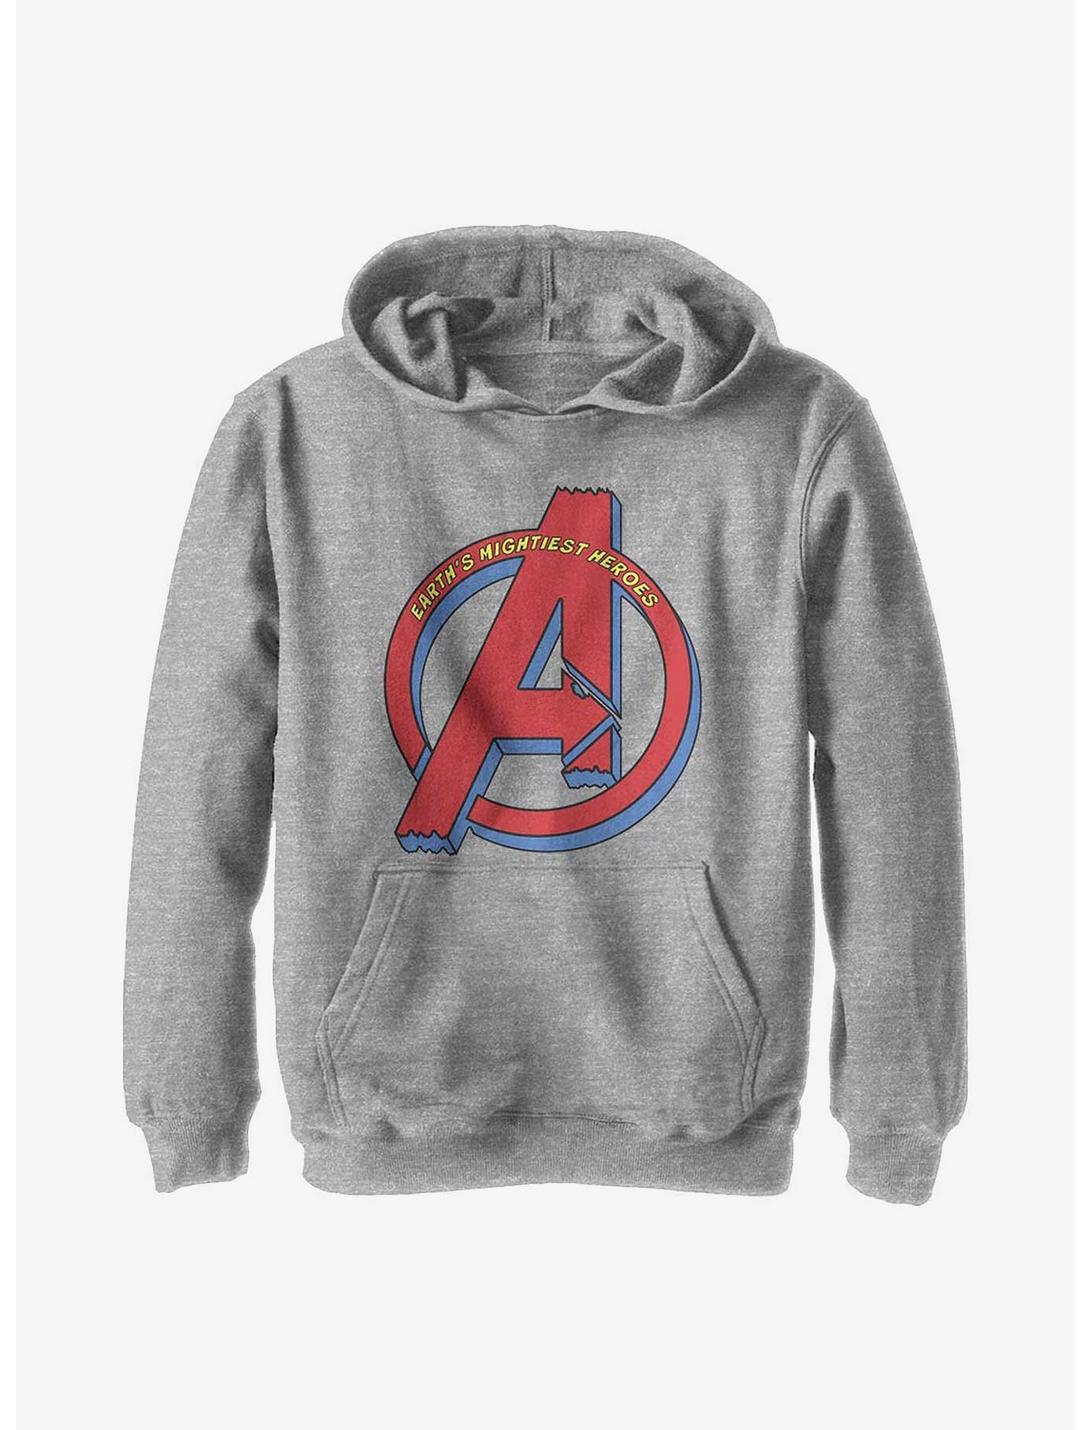 Plus Size Marvel Avengers Mightiest Youth Hoodie, ATH HTR, hi-res